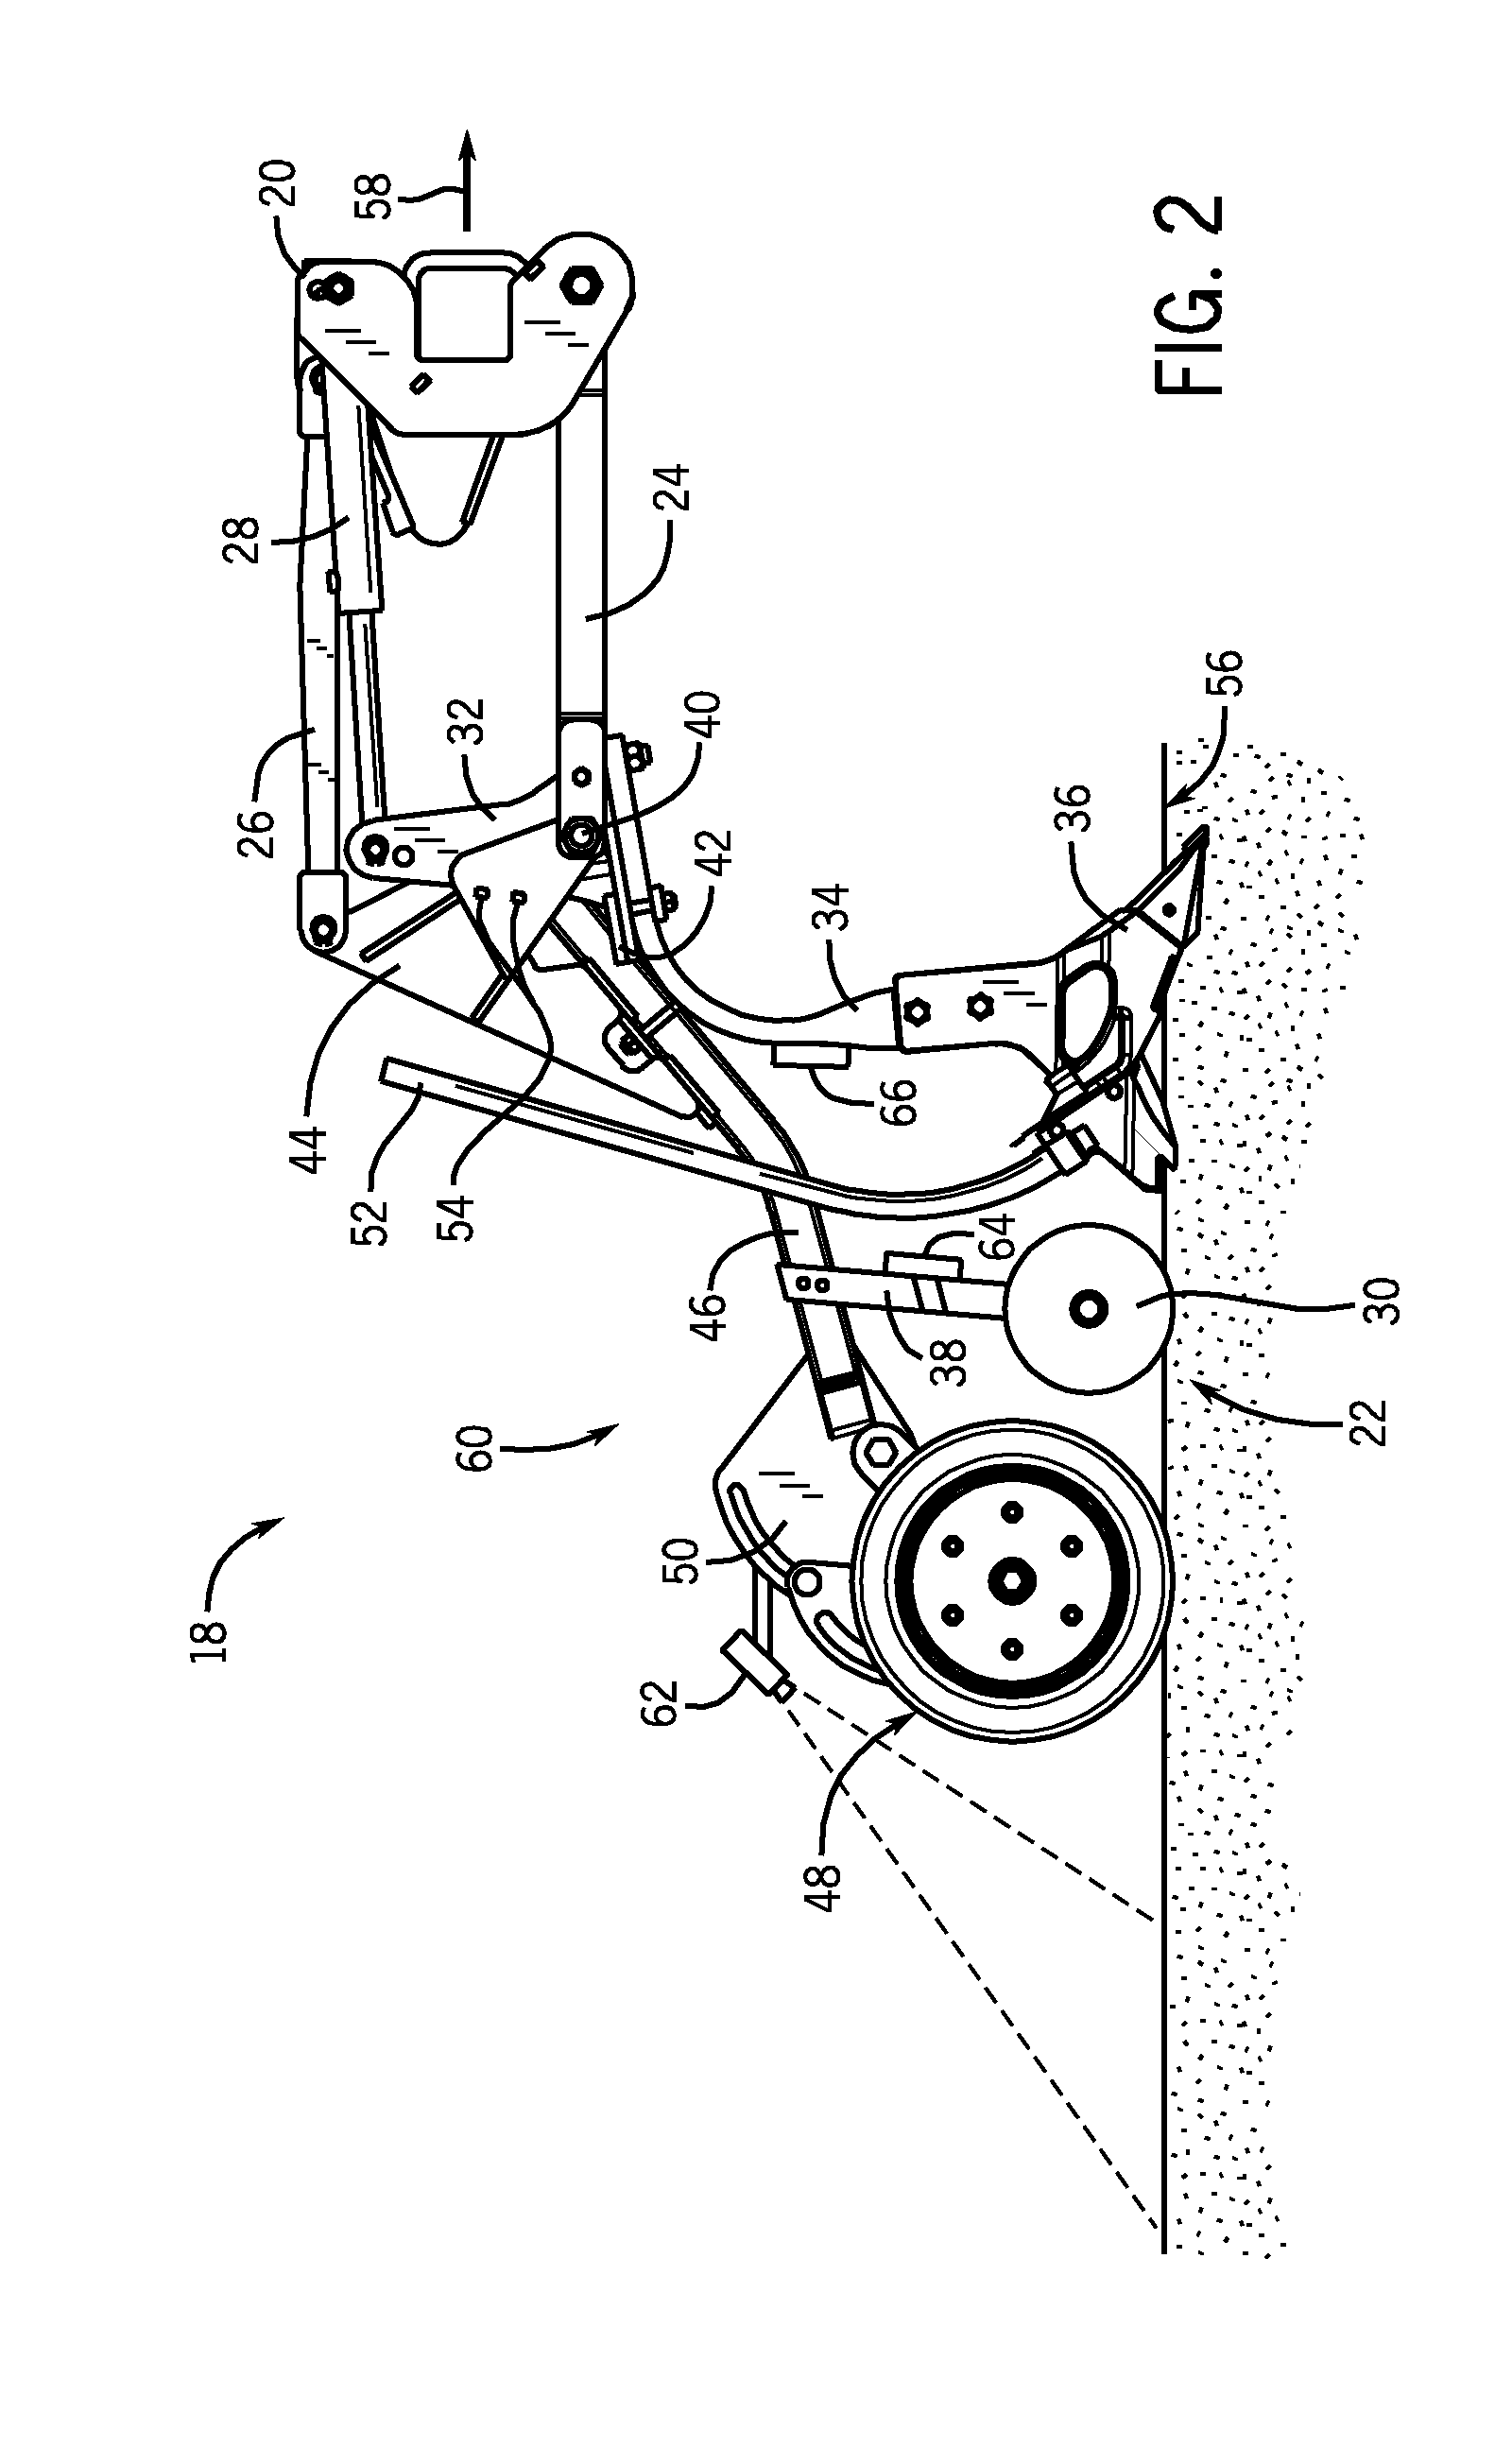 System and method for controlling soil finish from an agricultural implement